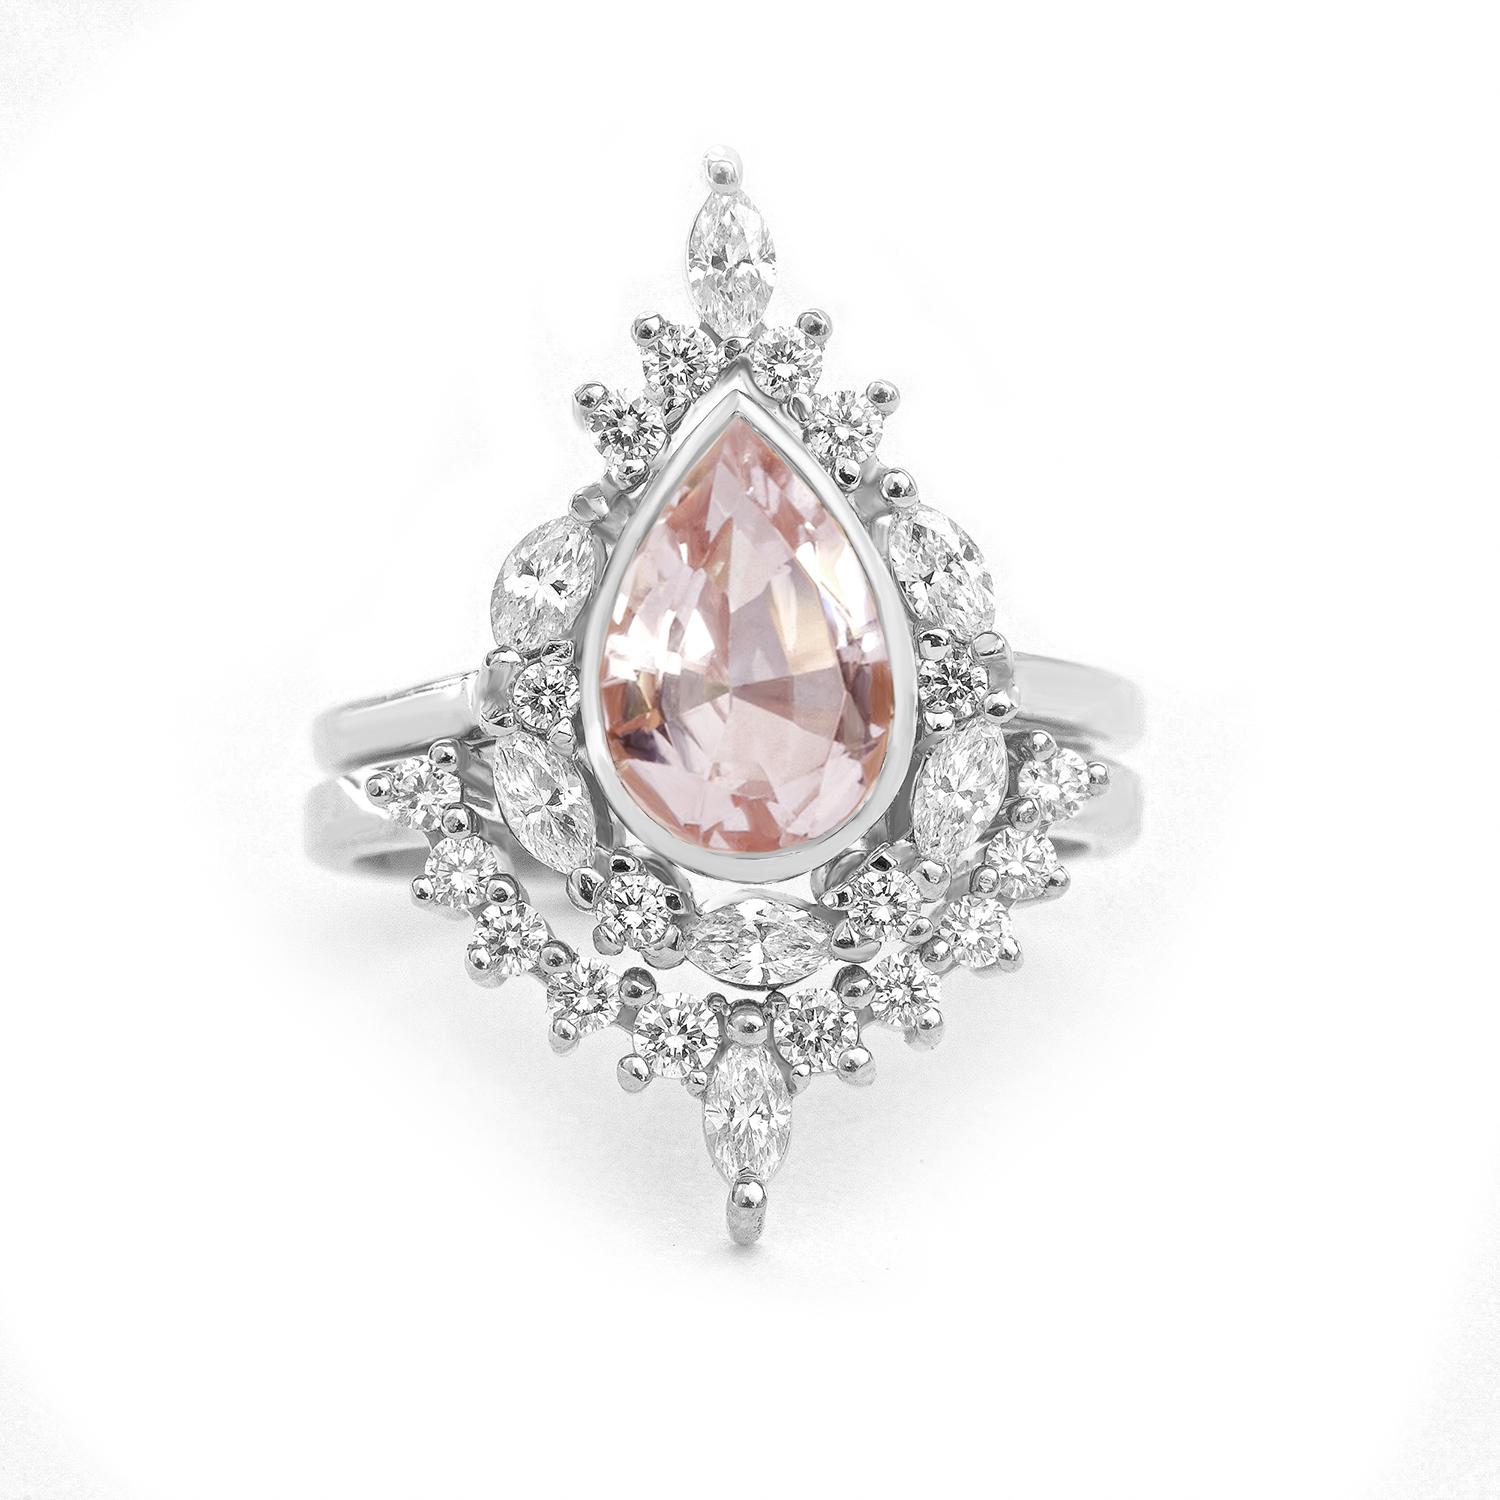 Unique Morganite Engagement Rings Set - Eva.
The Eva ring is named after the first woman Eva who is graceful, passionate, and full of energy & laughter. 
Handmade with care. 
An original design by Silly Shiny Diamonds. 

Details: 
* Center Stone